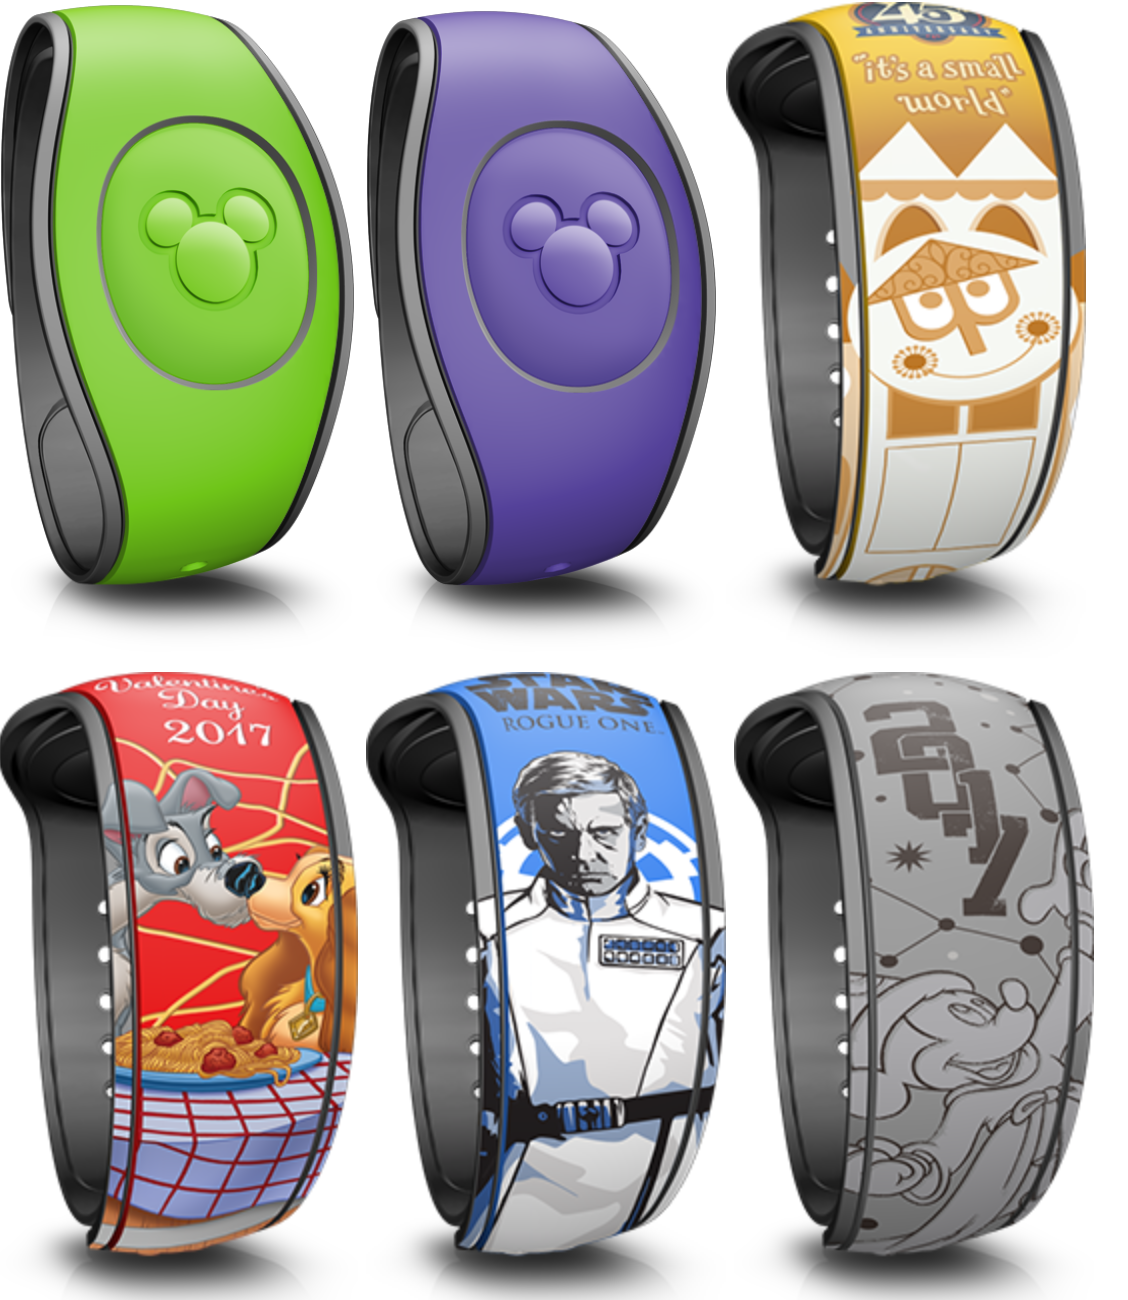 Magicband 2 Images Are Now Appearing On The My Disney Experience Website Disney Magicband